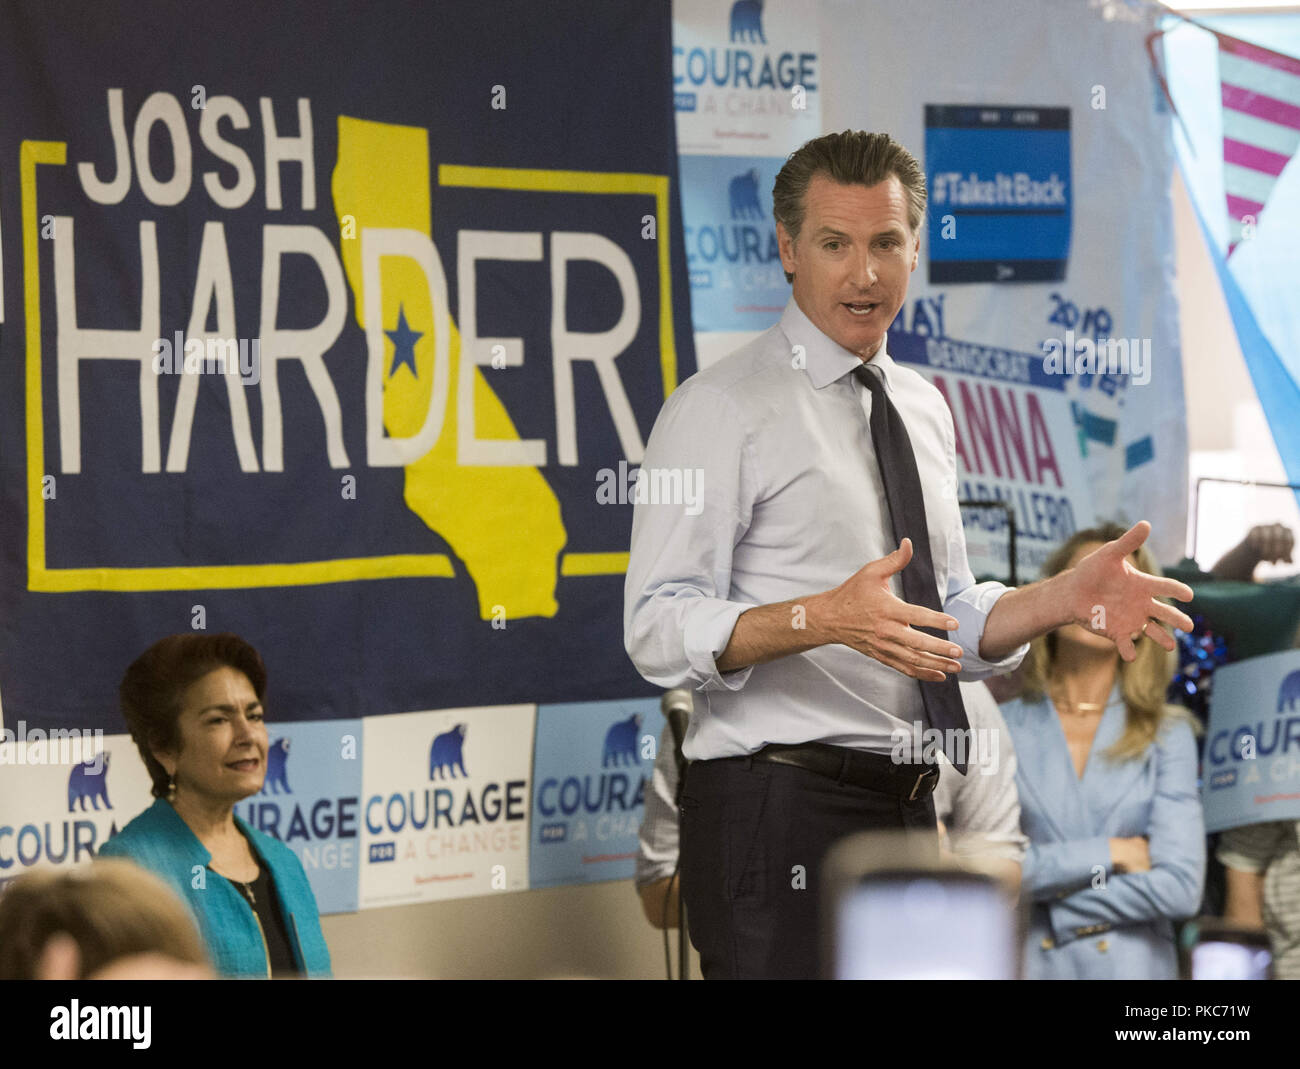 Modesto, California, U.S.A. 12th Sep, 2018. Gavin Newsom made a stop in Modesto California to campaign with Josh Harder who is running for Congress, California District 10. Josh Harden along with Asm. Anna Caballero gathered for a rally at Harden's campaign office Wednesday September 12, 2018. Credit: Marty Bicek/ZUMA Wire/Alamy Live News Stock Photo